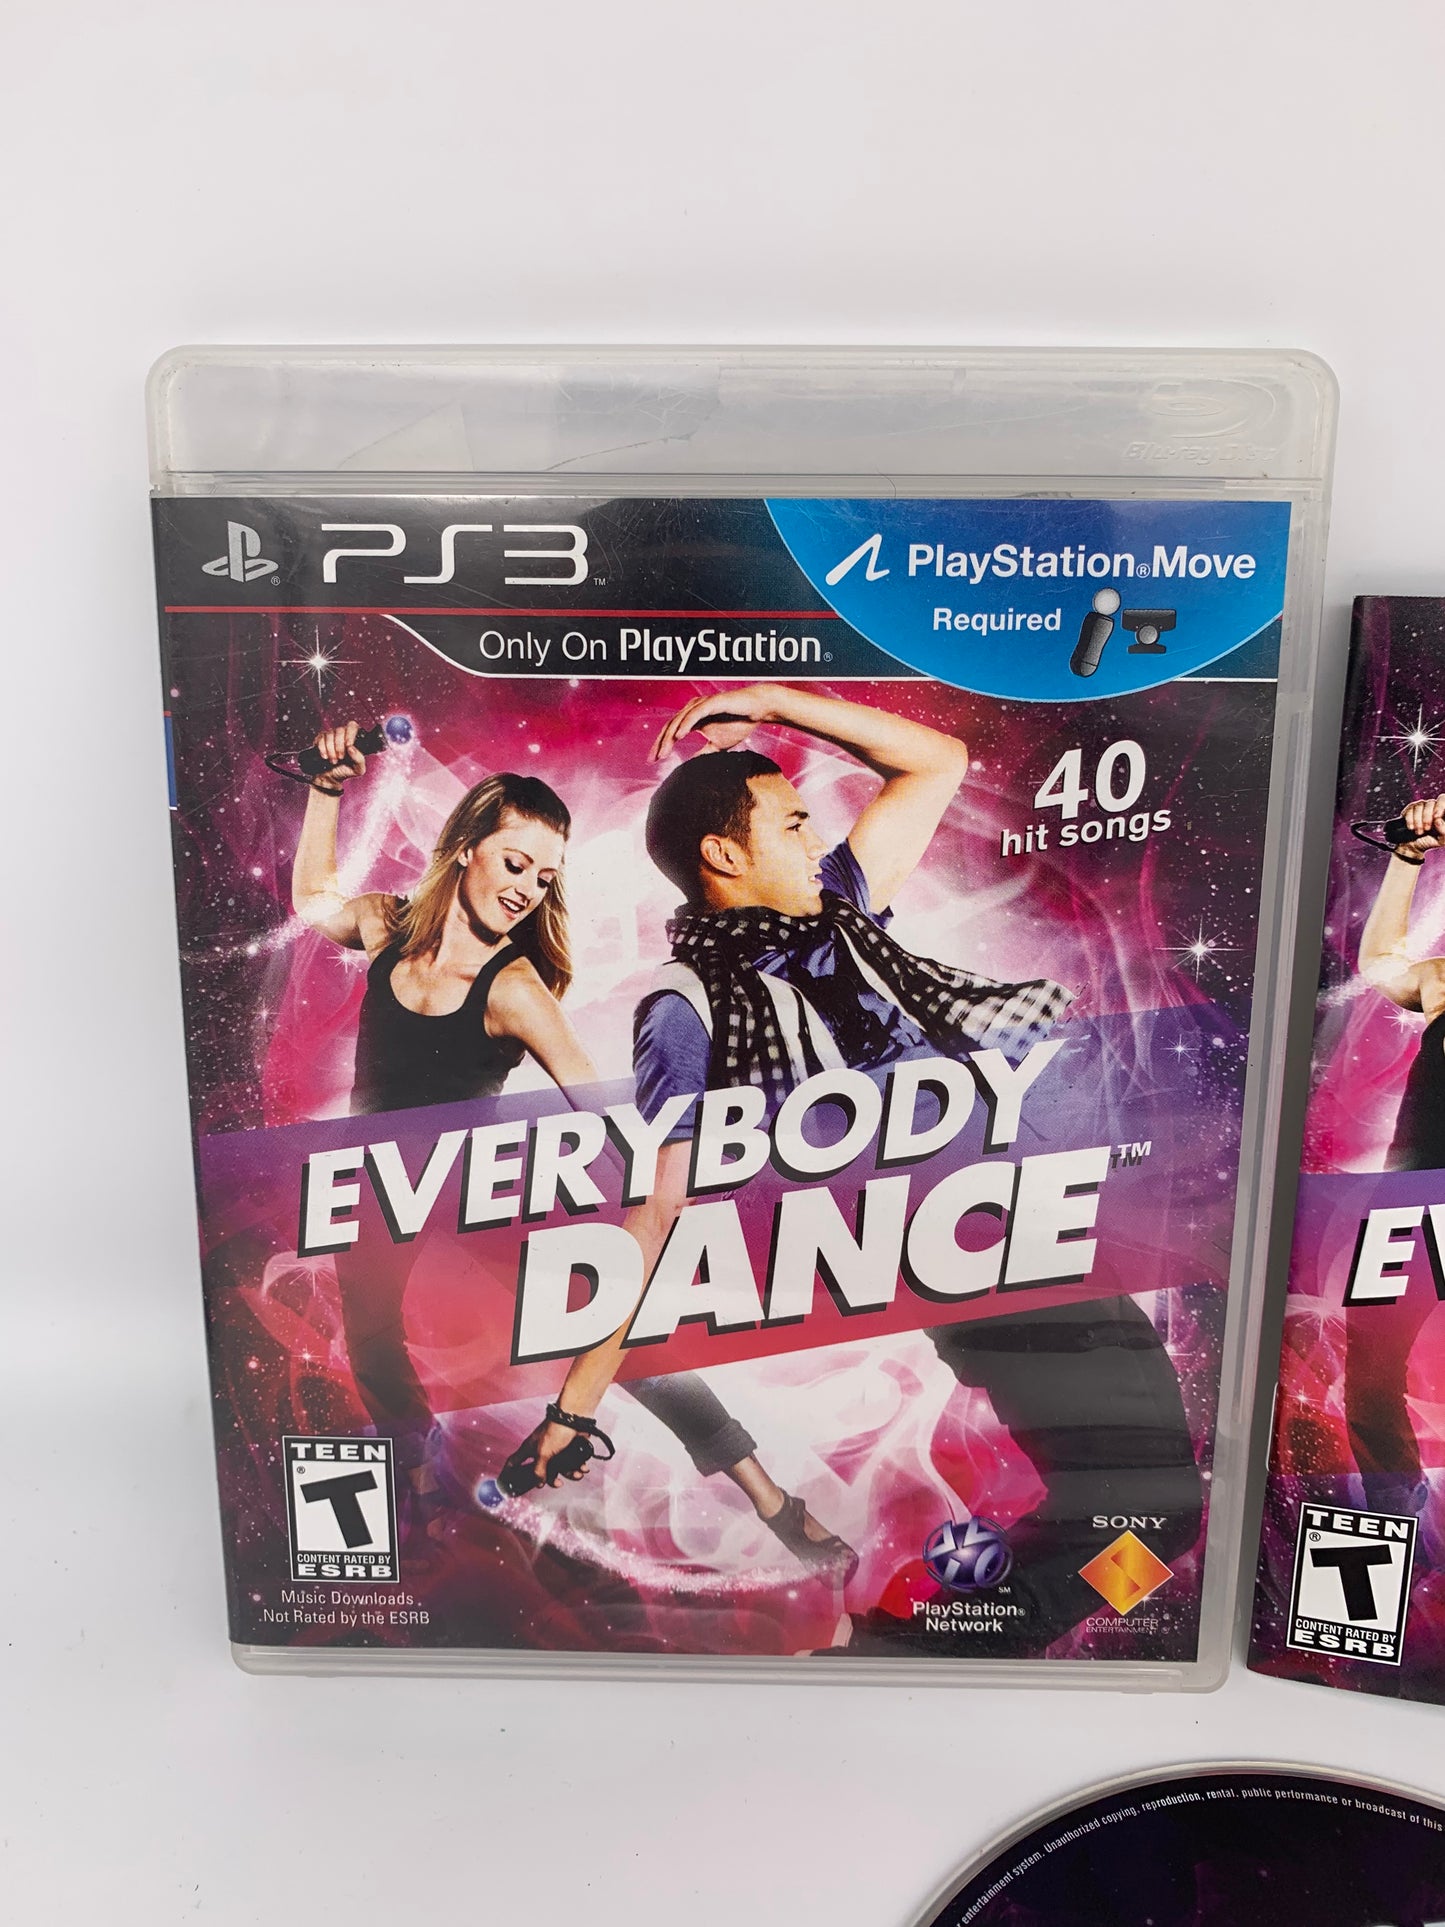 SONY PLAYSTATiON 3 [PS3] | EVERYBODY DANCE